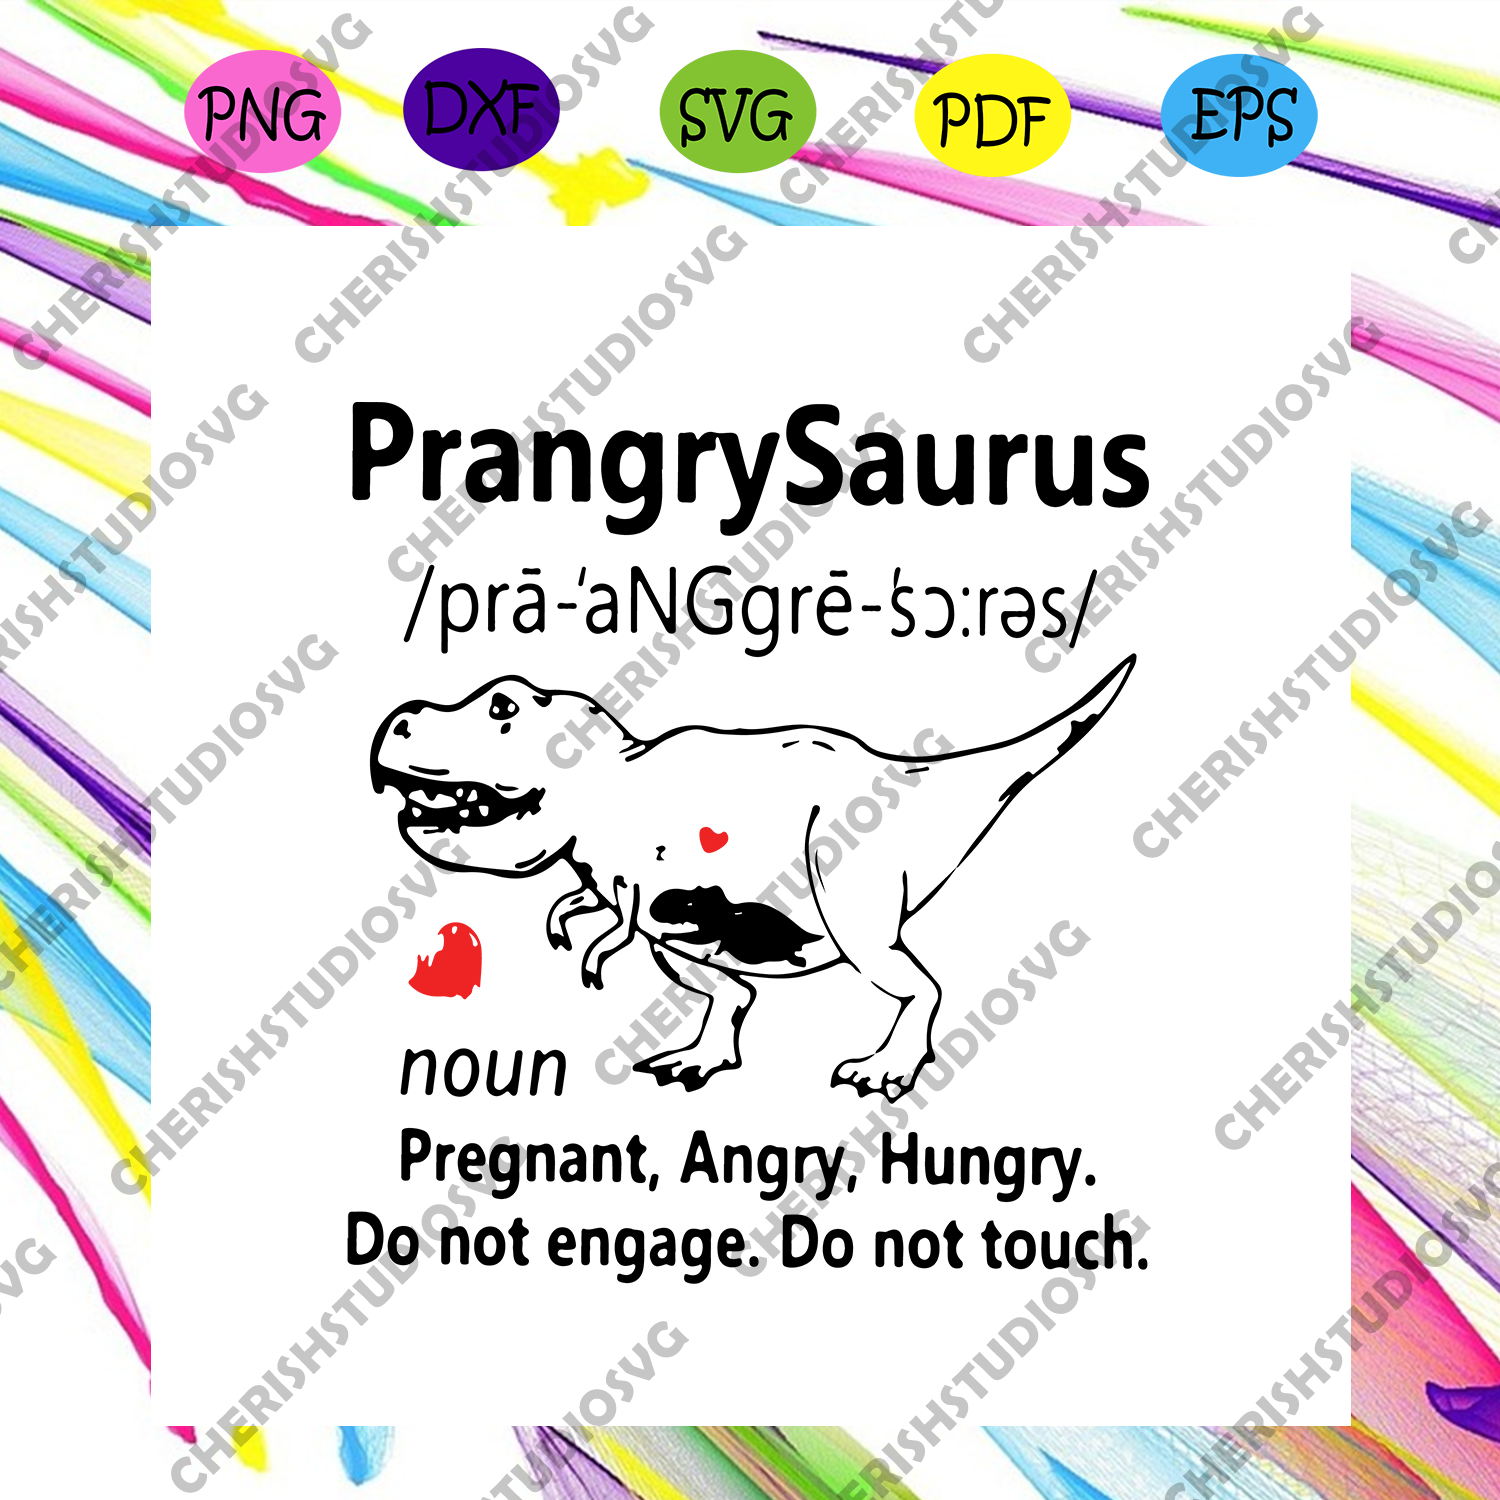 Download Prangrysaurus Definition Noun Pregnant Angry Hungry Do Not Engage Do N Cherishsvgstudio